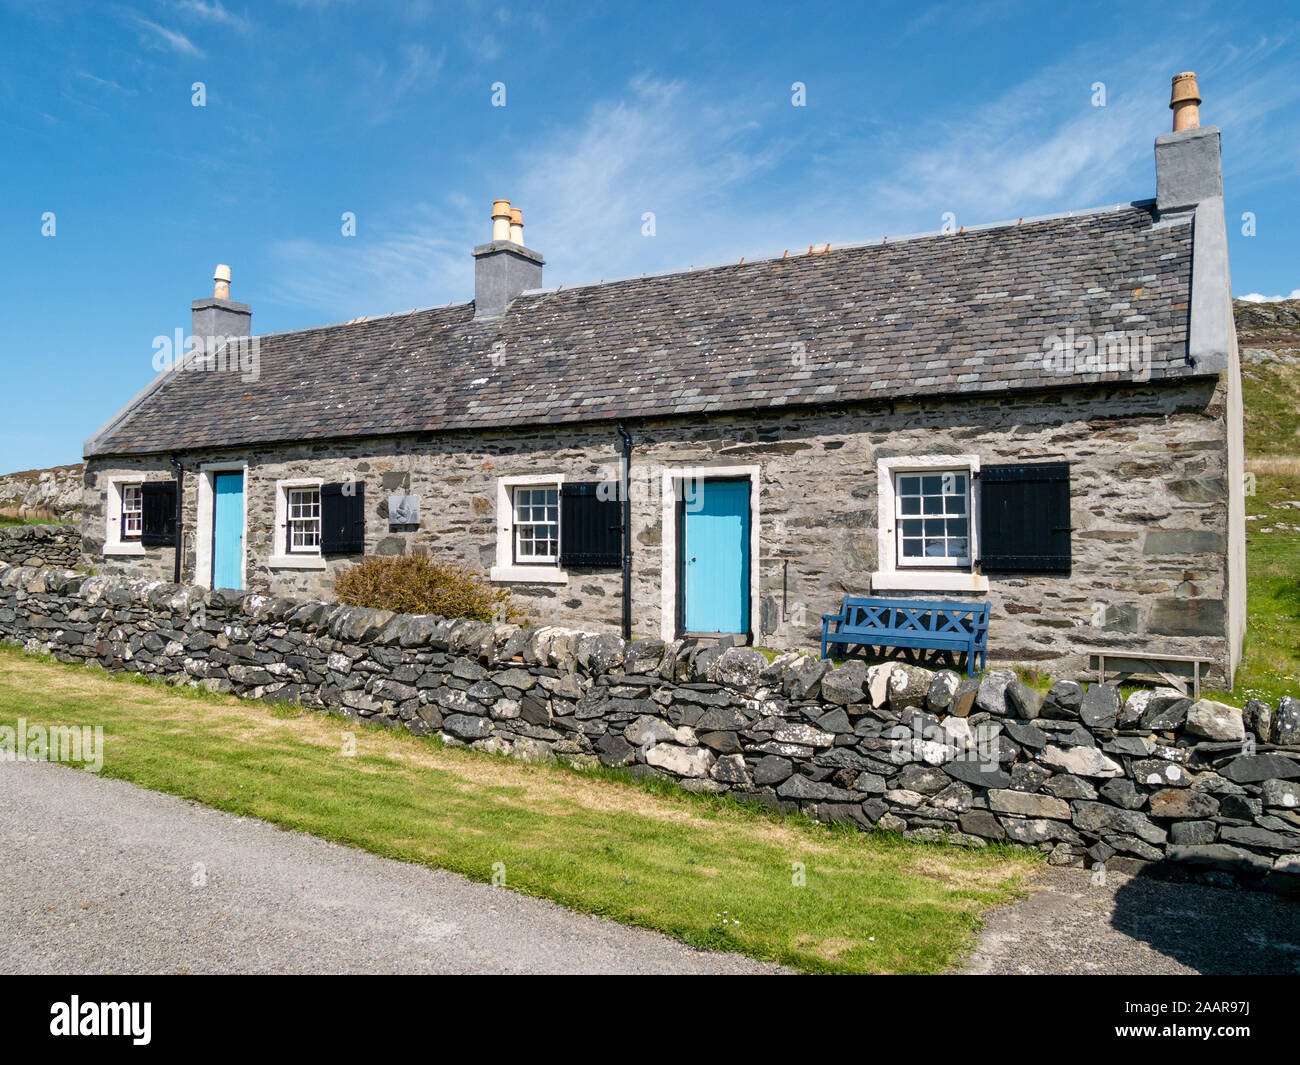 Row of smart old stone cottages with window shutters and blue doors used by the RSPB on the Isle of Oronsay, Colonsay, Scotland, UK Stock Photo